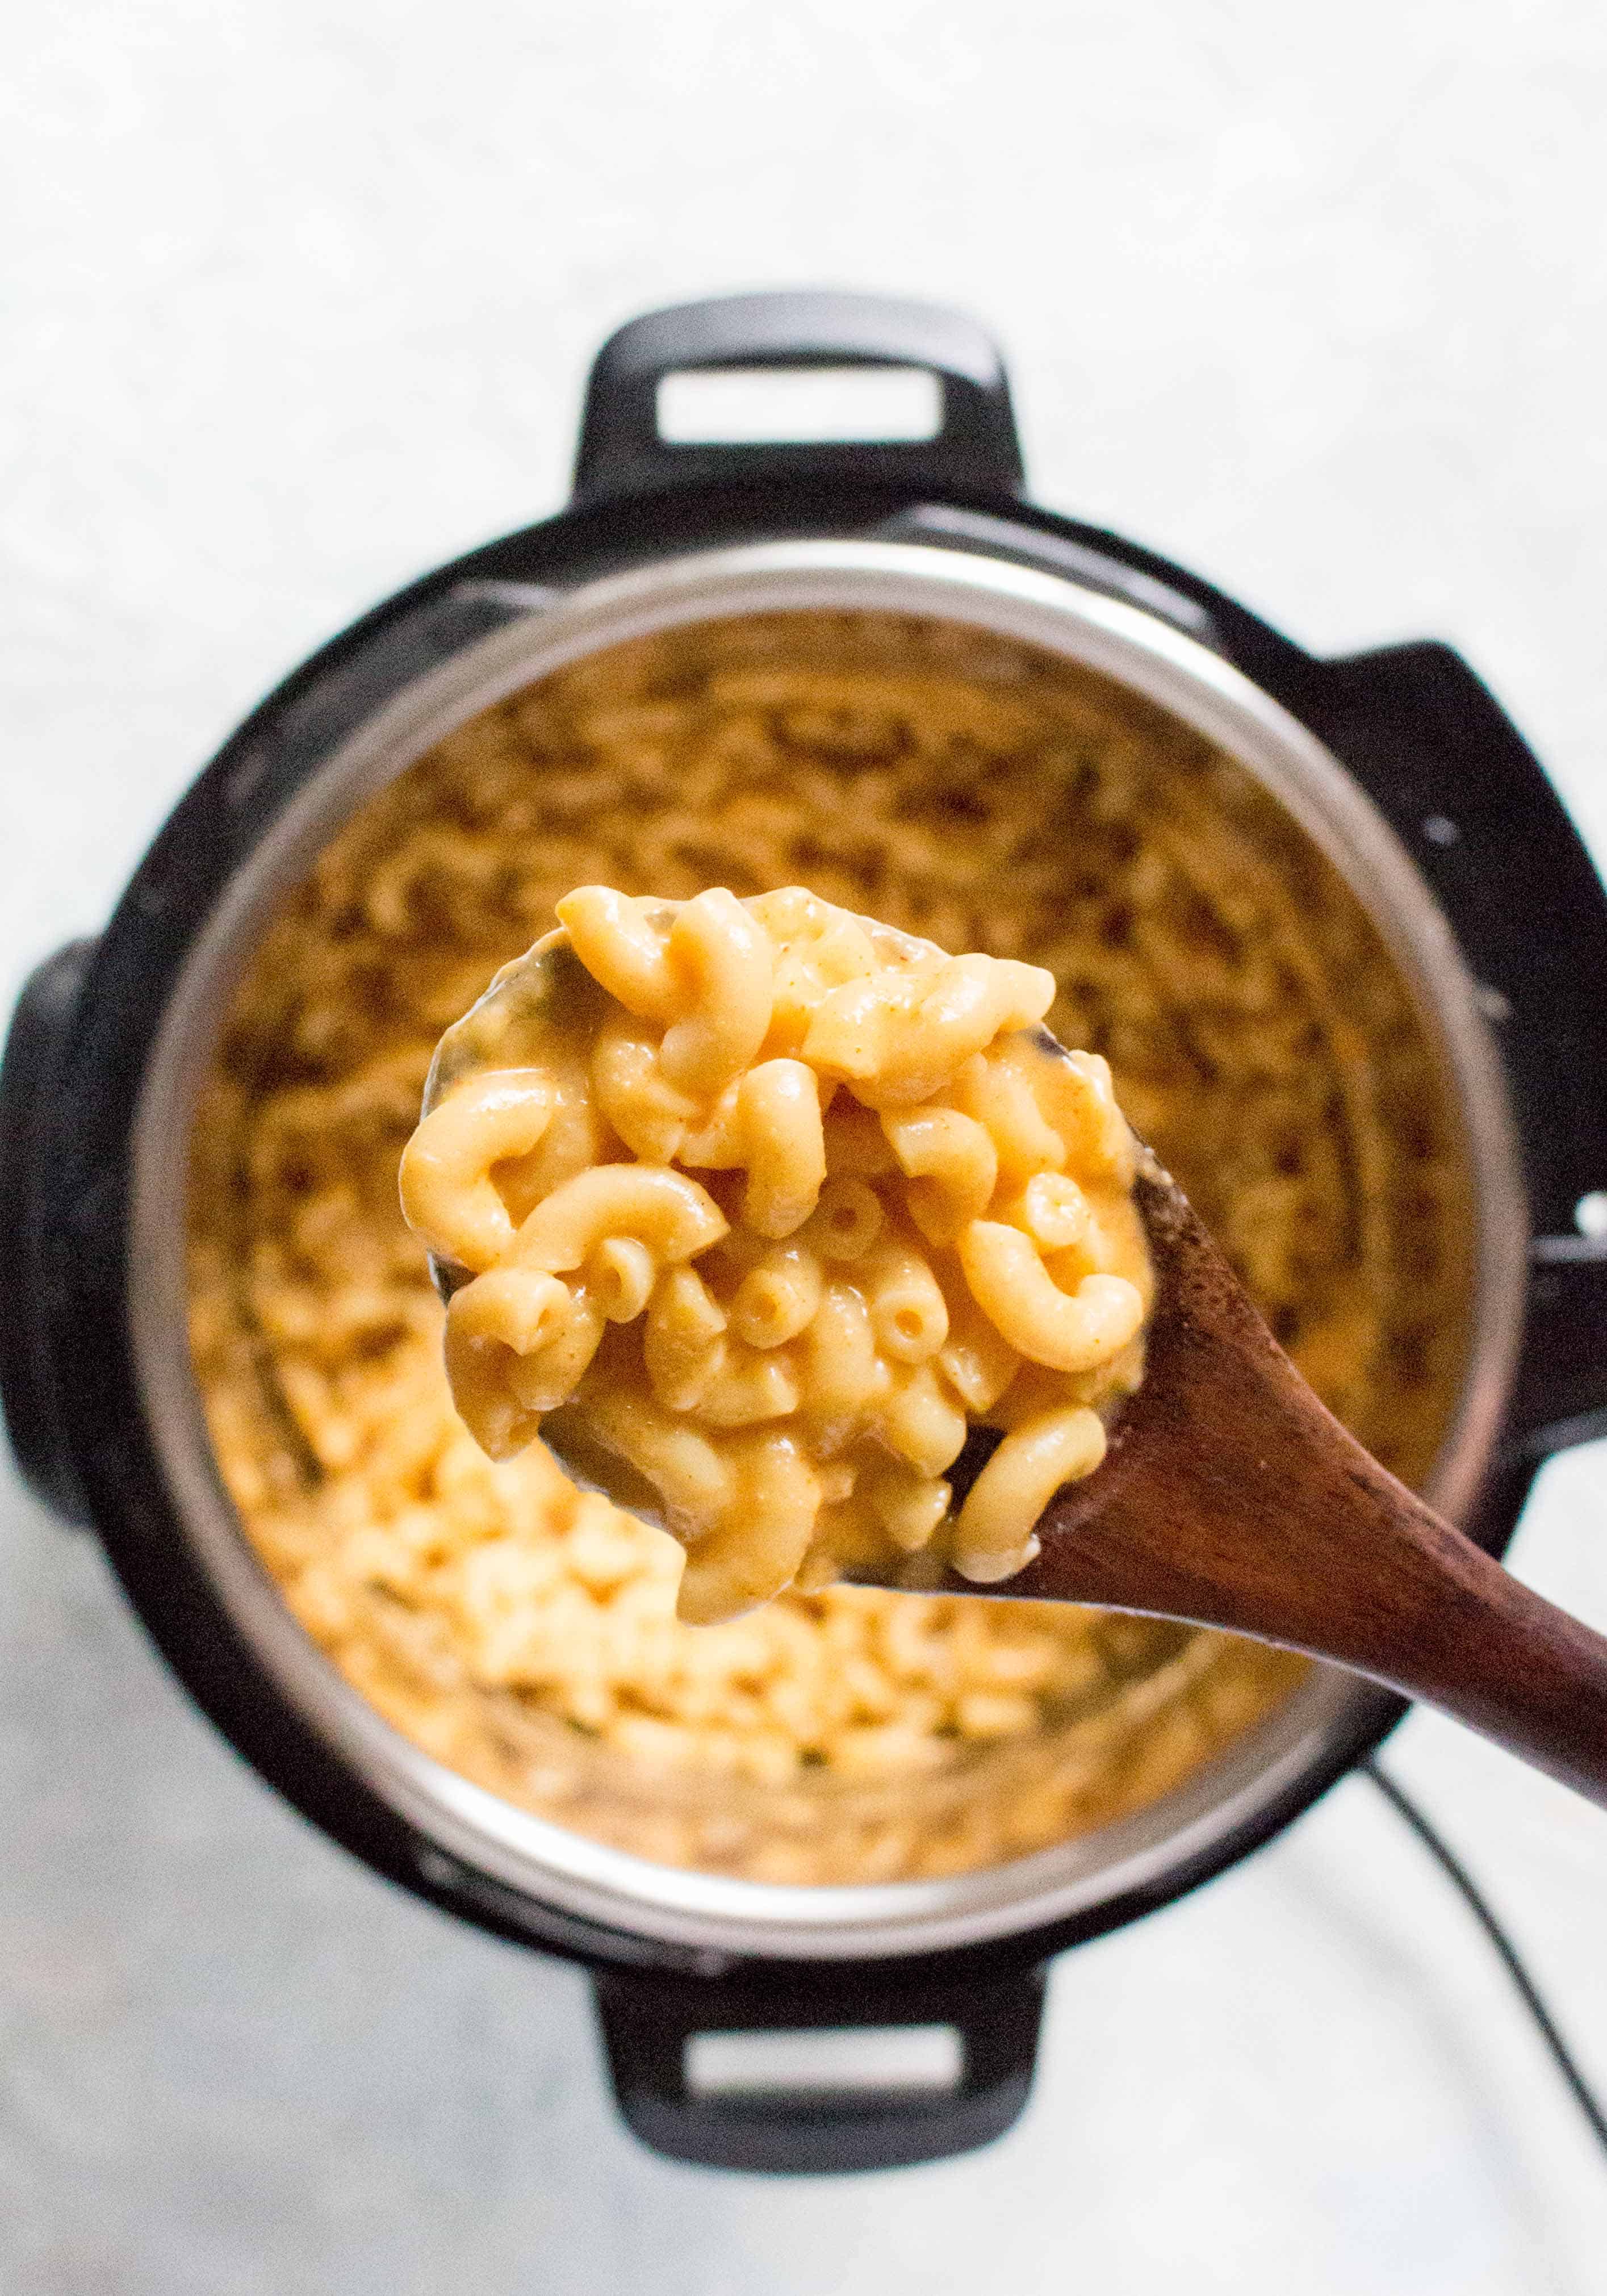 How To Make Mac and Cheese In The Instant Pot